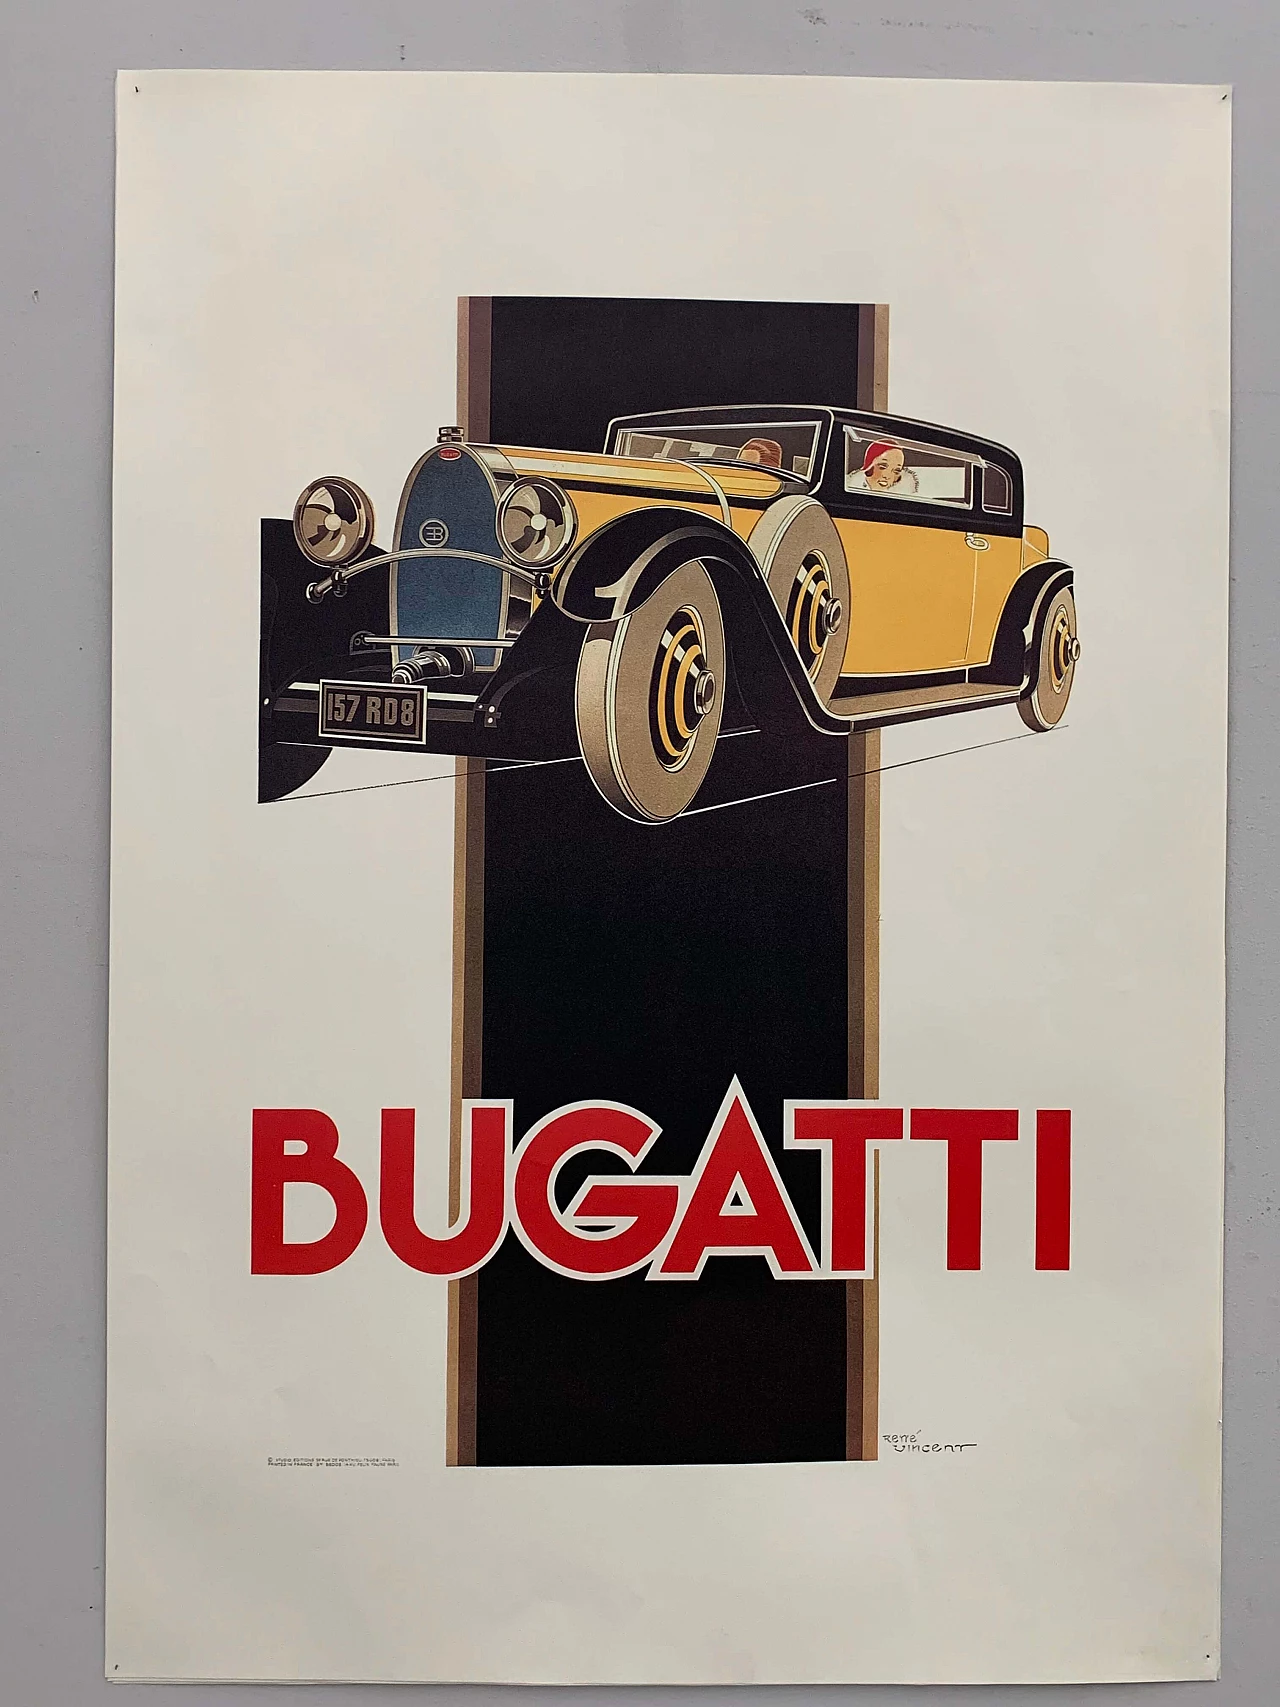 Bugatti Poster by Rene Vincent for Bedos Paris, 1960s 1106413